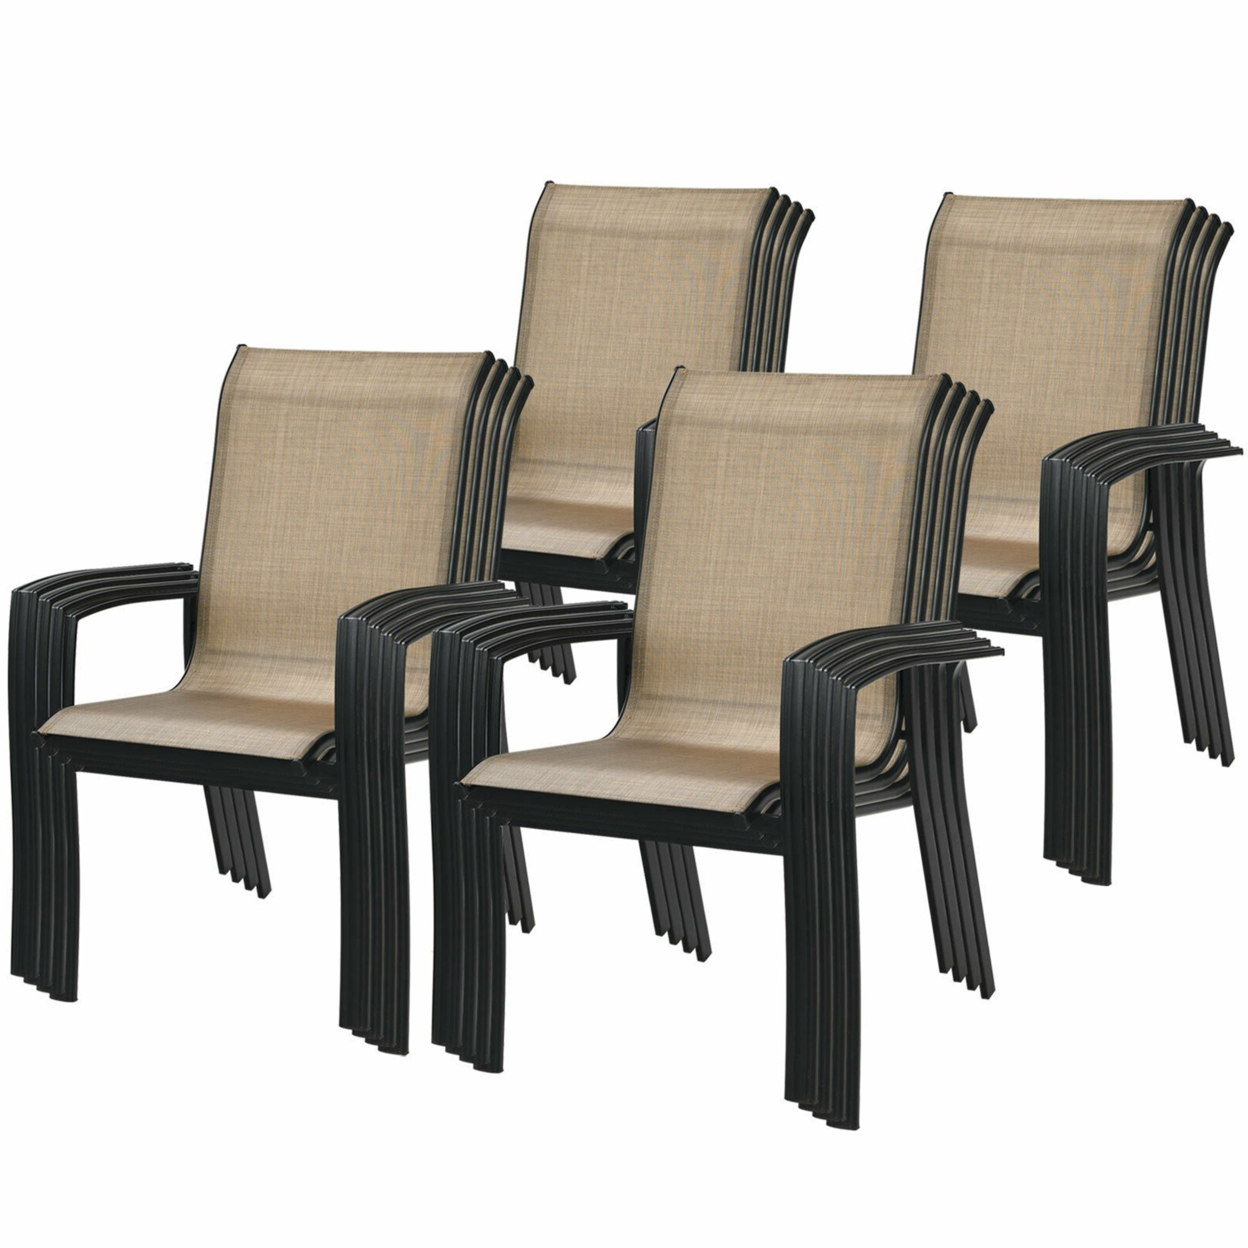 Outdoor Stackable Dining Chair Patio Armchair W/ Breathable Fabric - Brown, 16 Pcs